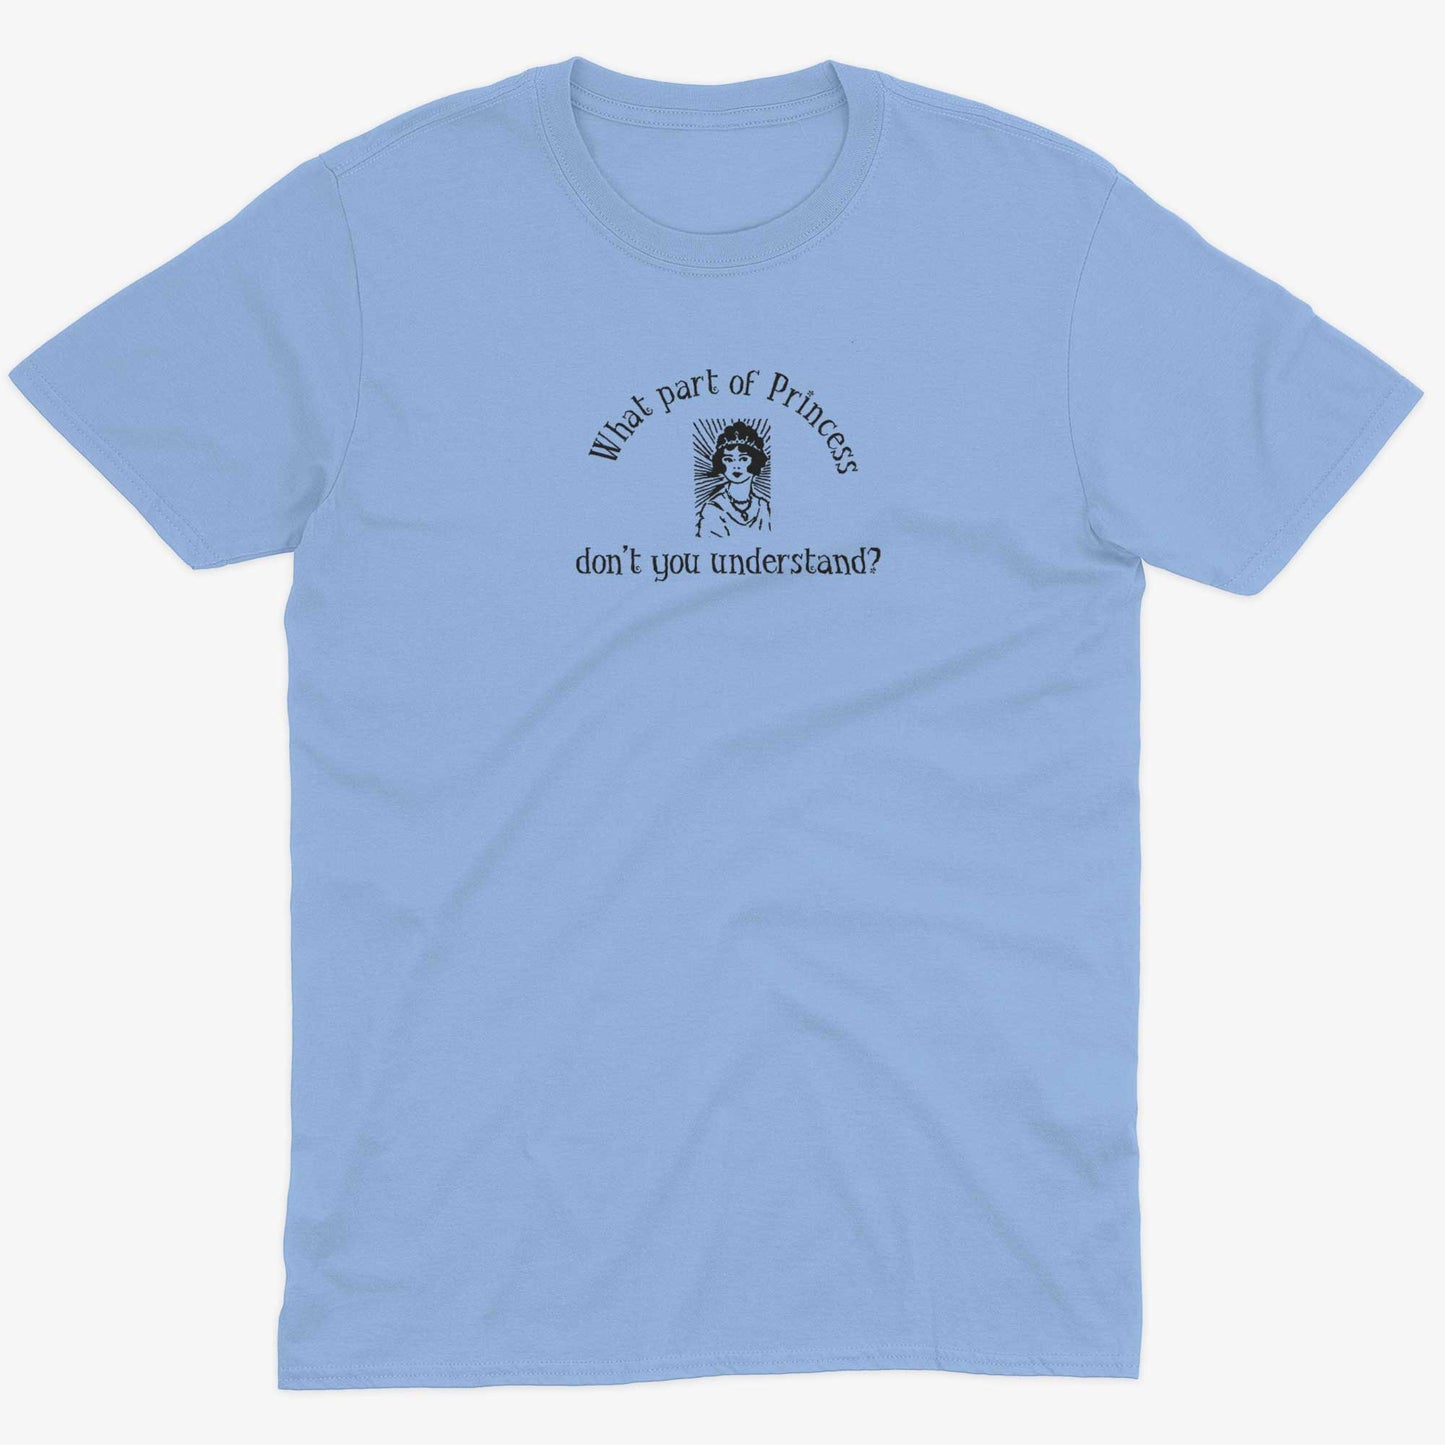 What Part Of Princess Don't You Understand? Unisex Or Women's Cotton T-shirt-Baby Blue-Unisex